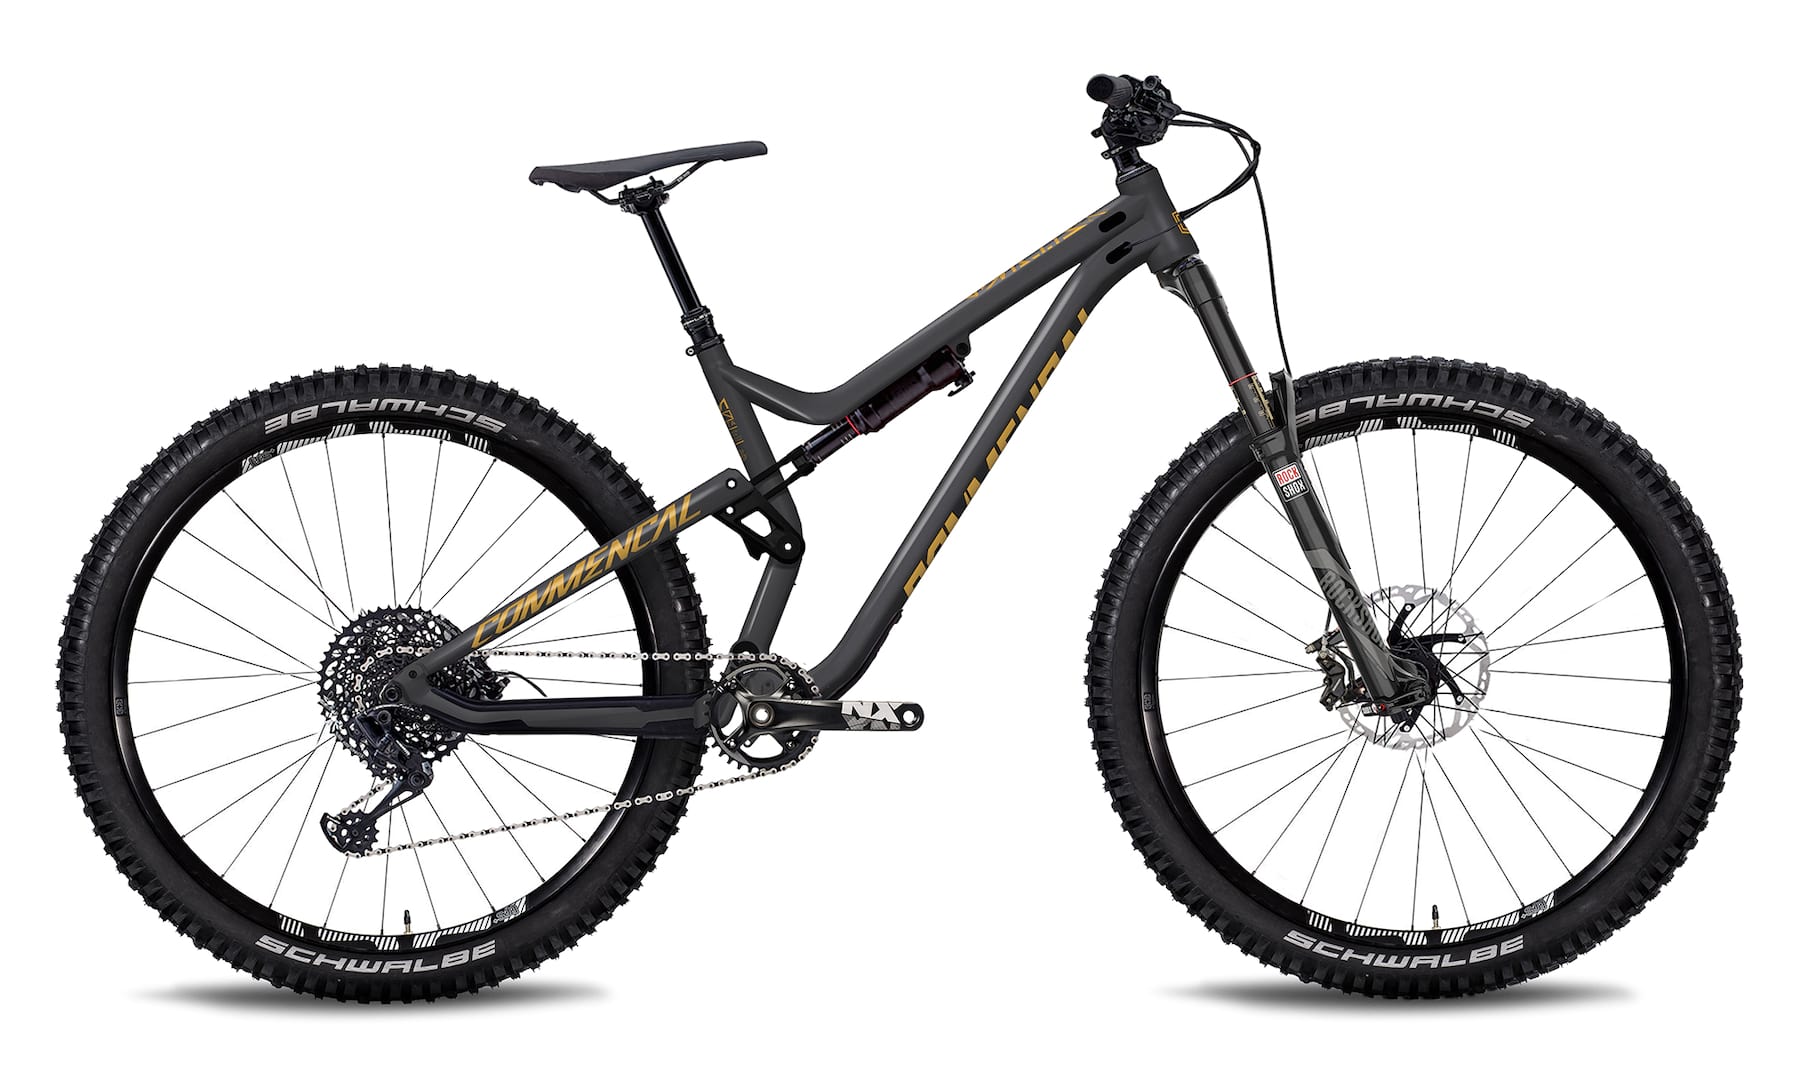 British Edition Commencal Meta Tr 29 Released Along With 2 More 29ers Singletrack World Magazine 